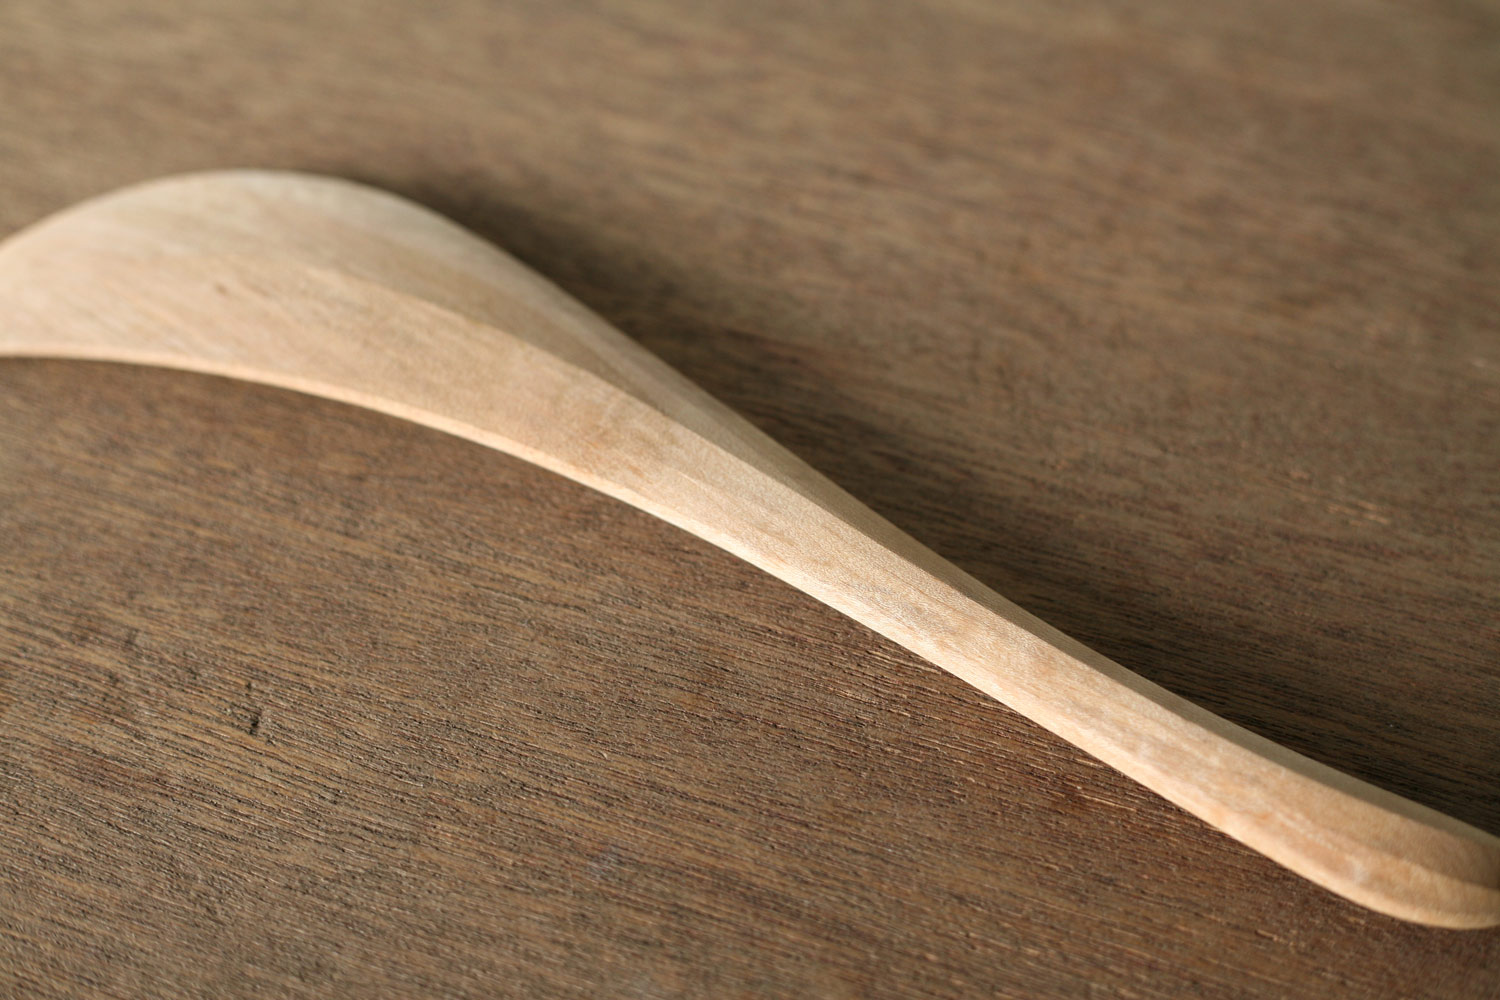 Wooden Spatula / S�EœREAL JAPAN PROJECT